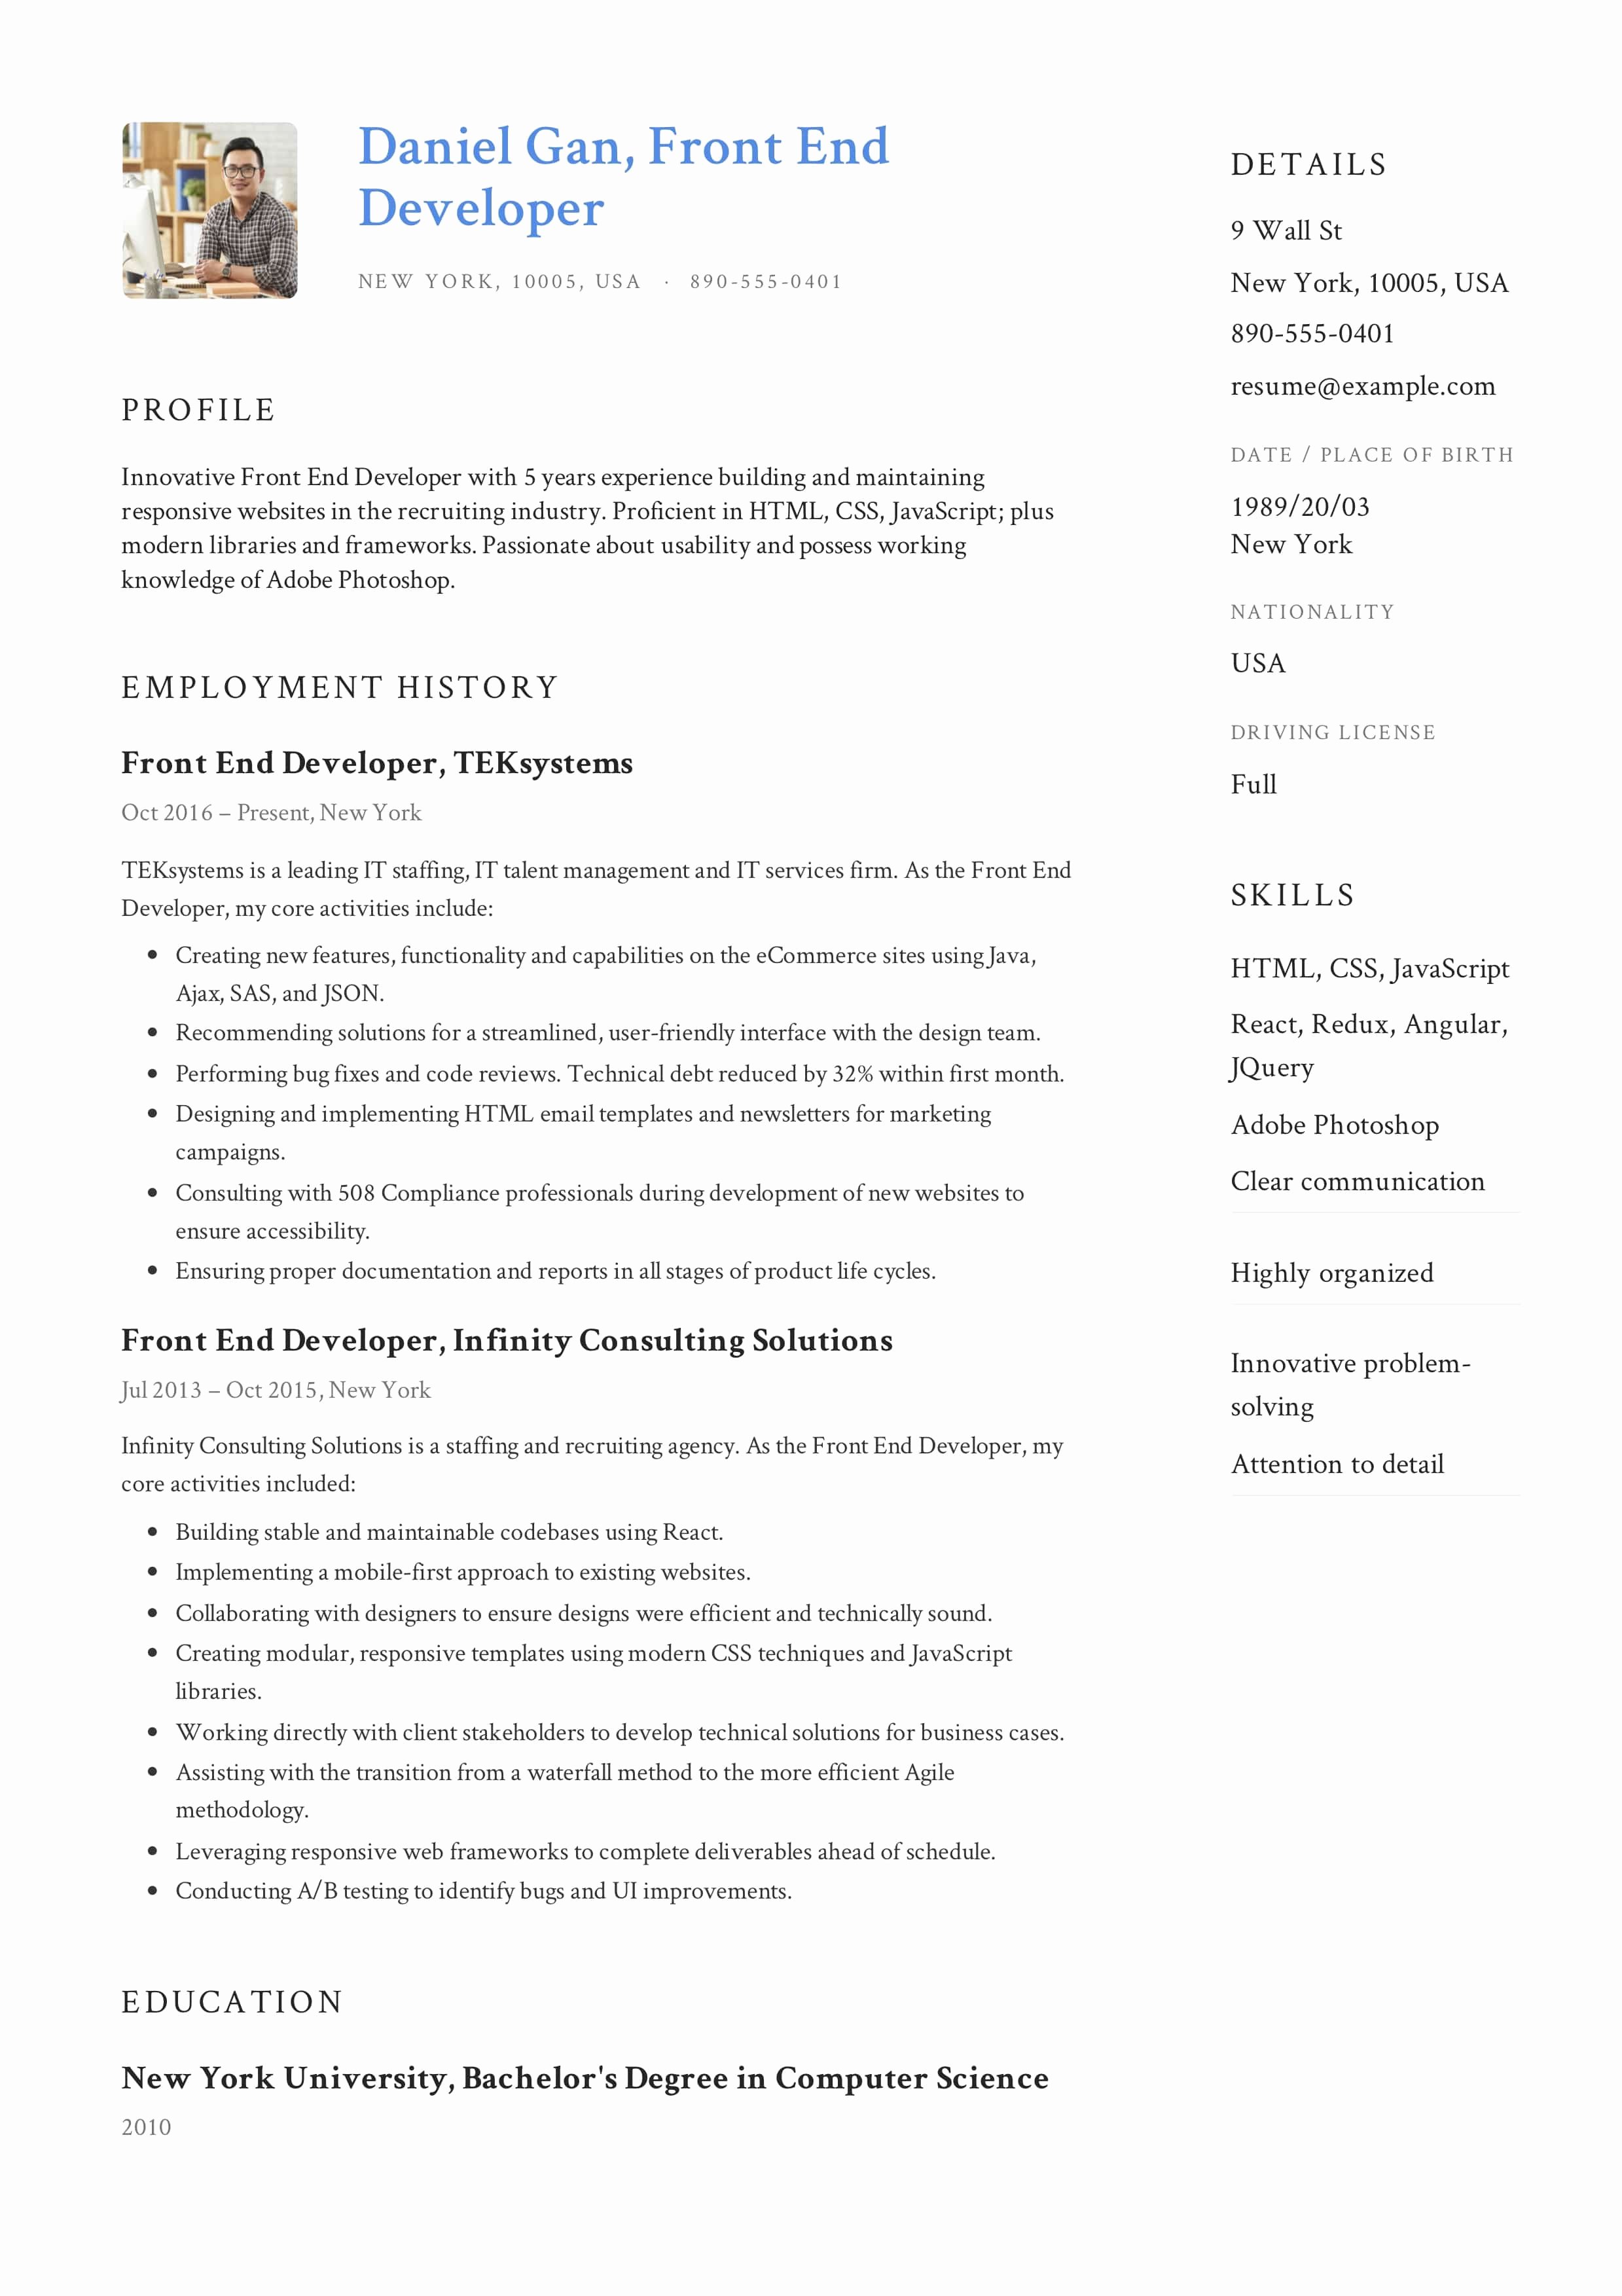 Front End Developer Resume Template Luxury Guide Front End Developer Resume [ 12 Samples ] Pdf